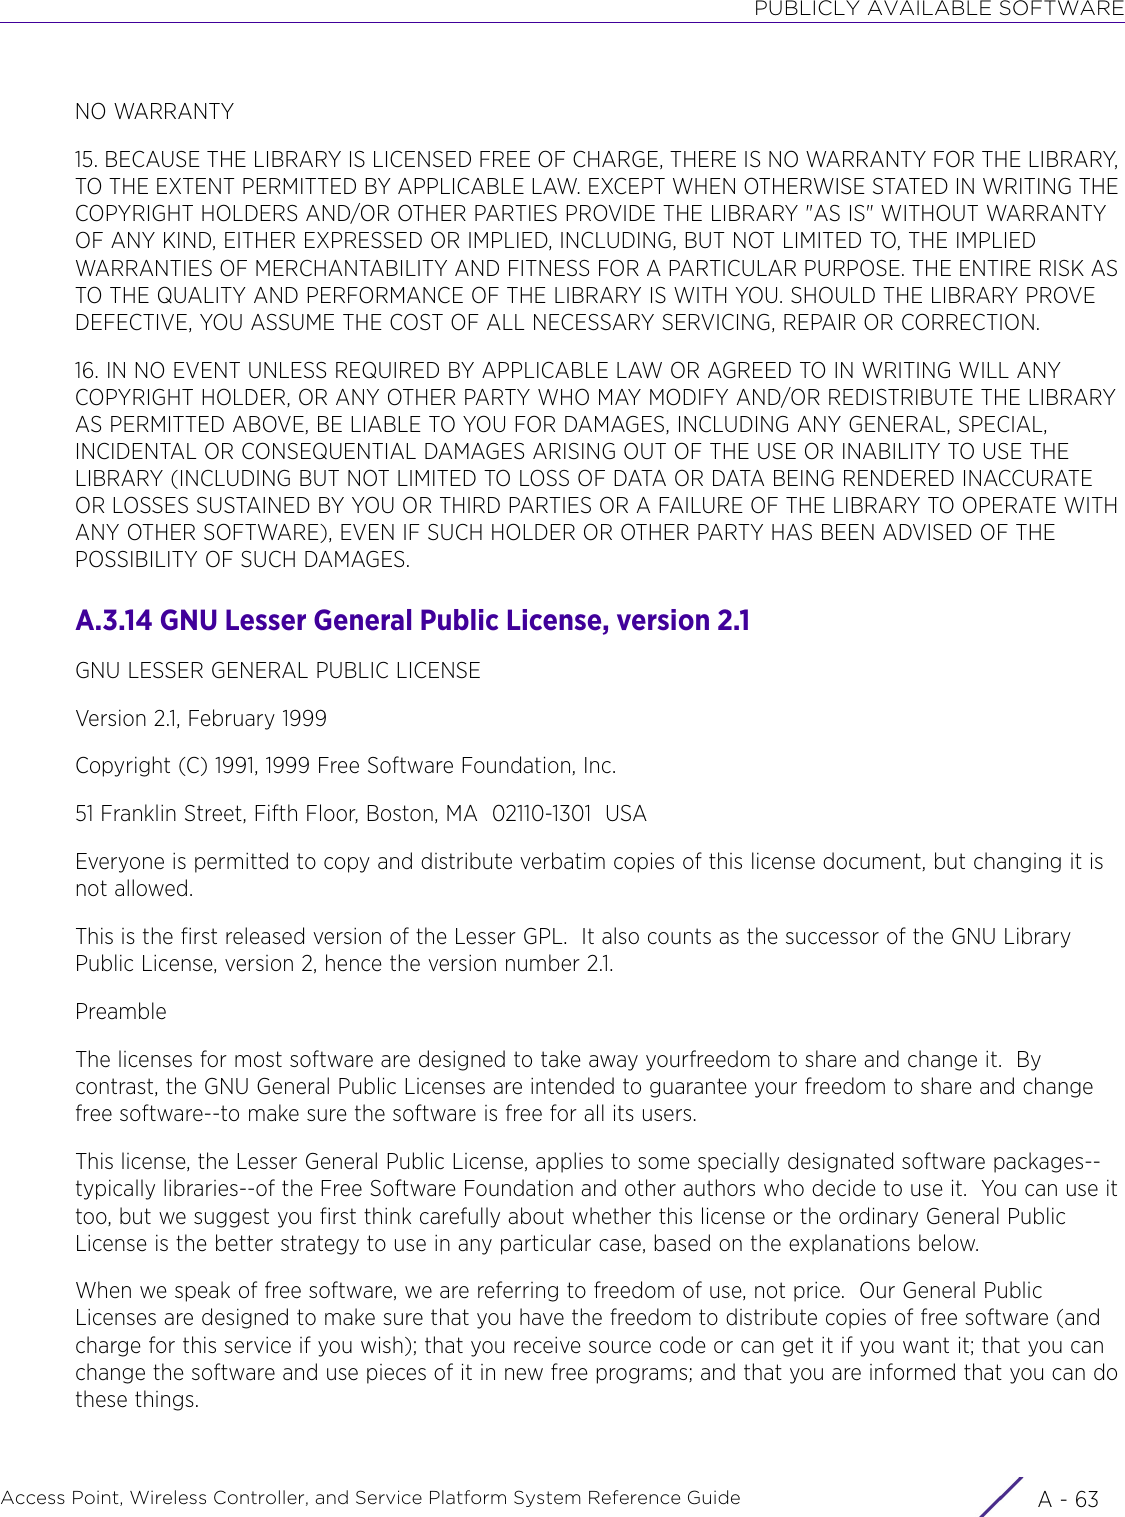 PUBLICLY AVAILABLE SOFTWAREAccess Point, Wireless Controller, and Service Platform System Reference Guide A - 63NO WARRANTY15. BECAUSE THE LIBRARY IS LICENSED FREE OF CHARGE, THERE IS NO WARRANTY FOR THE LIBRARY, TO THE EXTENT PERMITTED BY APPLICABLE LAW. EXCEPT WHEN OTHERWISE STATED IN WRITING THE COPYRIGHT HOLDERS AND/OR OTHER PARTIES PROVIDE THE LIBRARY &quot;AS IS&quot; WITHOUT WARRANTY OF ANY KIND, EITHER EXPRESSED OR IMPLIED, INCLUDING, BUT NOT LIMITED TO, THE IMPLIED WARRANTIES OF MERCHANTABILITY AND FITNESS FOR A PARTICULAR PURPOSE. THE ENTIRE RISK AS TO THE QUALITY AND PERFORMANCE OF THE LIBRARY IS WITH YOU. SHOULD THE LIBRARY PROVE DEFECTIVE, YOU ASSUME THE COST OF ALL NECESSARY SERVICING, REPAIR OR CORRECTION.16. IN NO EVENT UNLESS REQUIRED BY APPLICABLE LAW OR AGREED TO IN WRITING WILL ANY COPYRIGHT HOLDER, OR ANY OTHER PARTY WHO MAY MODIFY AND/OR REDISTRIBUTE THE LIBRARY AS PERMITTED ABOVE, BE LIABLE TO YOU FOR DAMAGES, INCLUDING ANY GENERAL, SPECIAL, INCIDENTAL OR CONSEQUENTIAL DAMAGES ARISING OUT OF THE USE OR INABILITY TO USE THE LIBRARY (INCLUDING BUT NOT LIMITED TO LOSS OF DATA OR DATA BEING RENDERED INACCURATE OR LOSSES SUSTAINED BY YOU OR THIRD PARTIES OR A FAILURE OF THE LIBRARY TO OPERATE WITH ANY OTHER SOFTWARE), EVEN IF SUCH HOLDER OR OTHER PARTY HAS BEEN ADVISED OF THE POSSIBILITY OF SUCH DAMAGES.A.3.14 GNU Lesser General Public License, version 2.1GNU LESSER GENERAL PUBLIC LICENSEVersion 2.1, February 1999Copyright (C) 1991, 1999 Free Software Foundation, Inc.51 Franklin Street, Fifth Floor, Boston, MA  02110-1301  USAEveryone is permitted to copy and distribute verbatim copies of this license document, but changing it is not allowed.This is the first released version of the Lesser GPL.  It also counts as the successor of the GNU Library Public License, version 2, hence the version number 2.1.PreambleThe licenses for most software are designed to take away yourfreedom to share and change it.  By contrast, the GNU General Public Licenses are intended to guarantee your freedom to share and change free software--to make sure the software is free for all its users.This license, the Lesser General Public License, applies to some specially designated software packages--typically libraries--of the Free Software Foundation and other authors who decide to use it.  You can use it too, but we suggest you first think carefully about whether this license or the ordinary General Public License is the better strategy to use in any particular case, based on the explanations below.When we speak of free software, we are referring to freedom of use, not price.  Our General Public Licenses are designed to make sure that you have the freedom to distribute copies of free software (and charge for this service if you wish); that you receive source code or can get it if you want it; that you can change the software and use pieces of it in new free programs; and that you are informed that you can do these things.